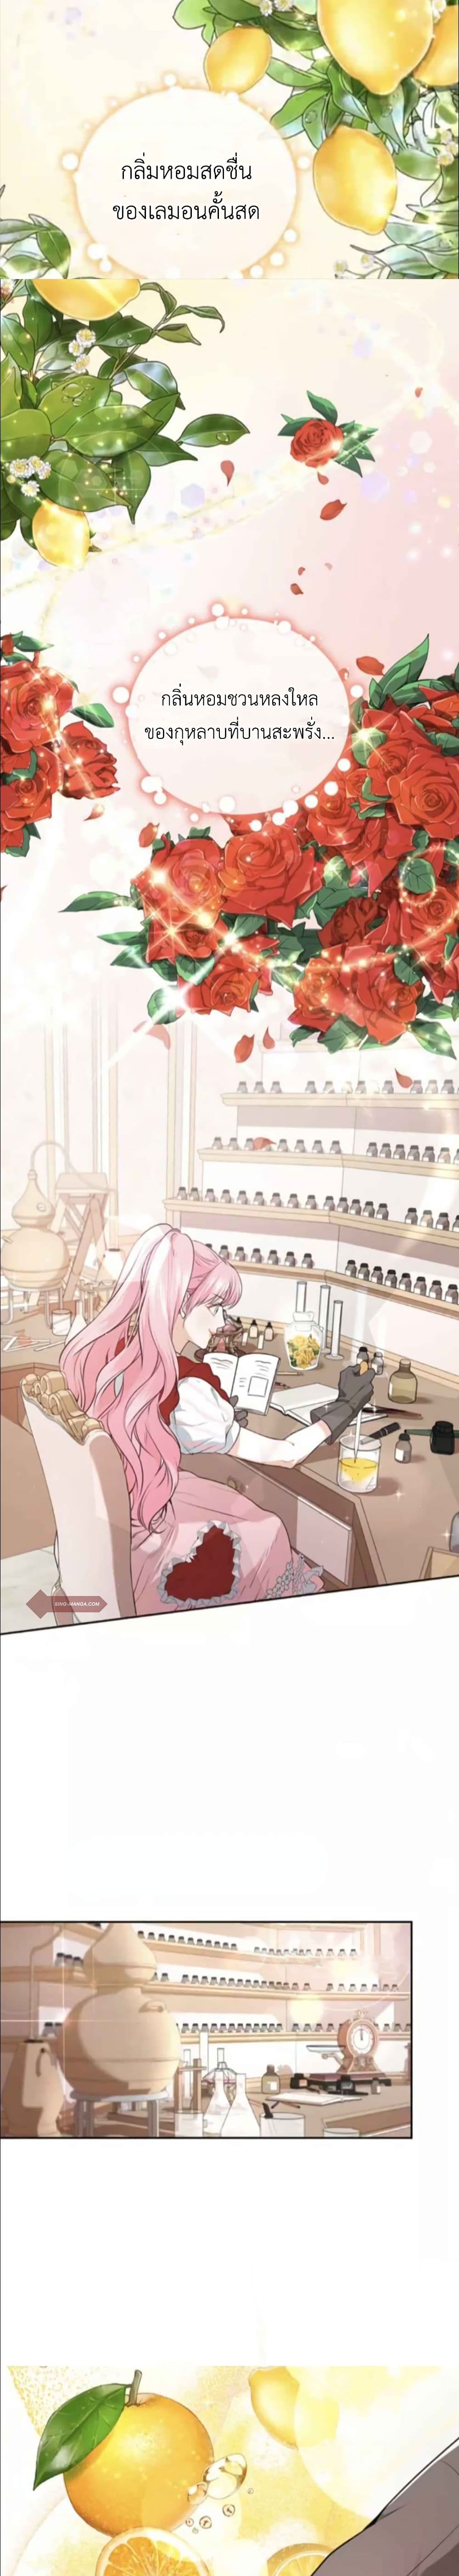 The Tyrant’s Only Perfumer 4-4